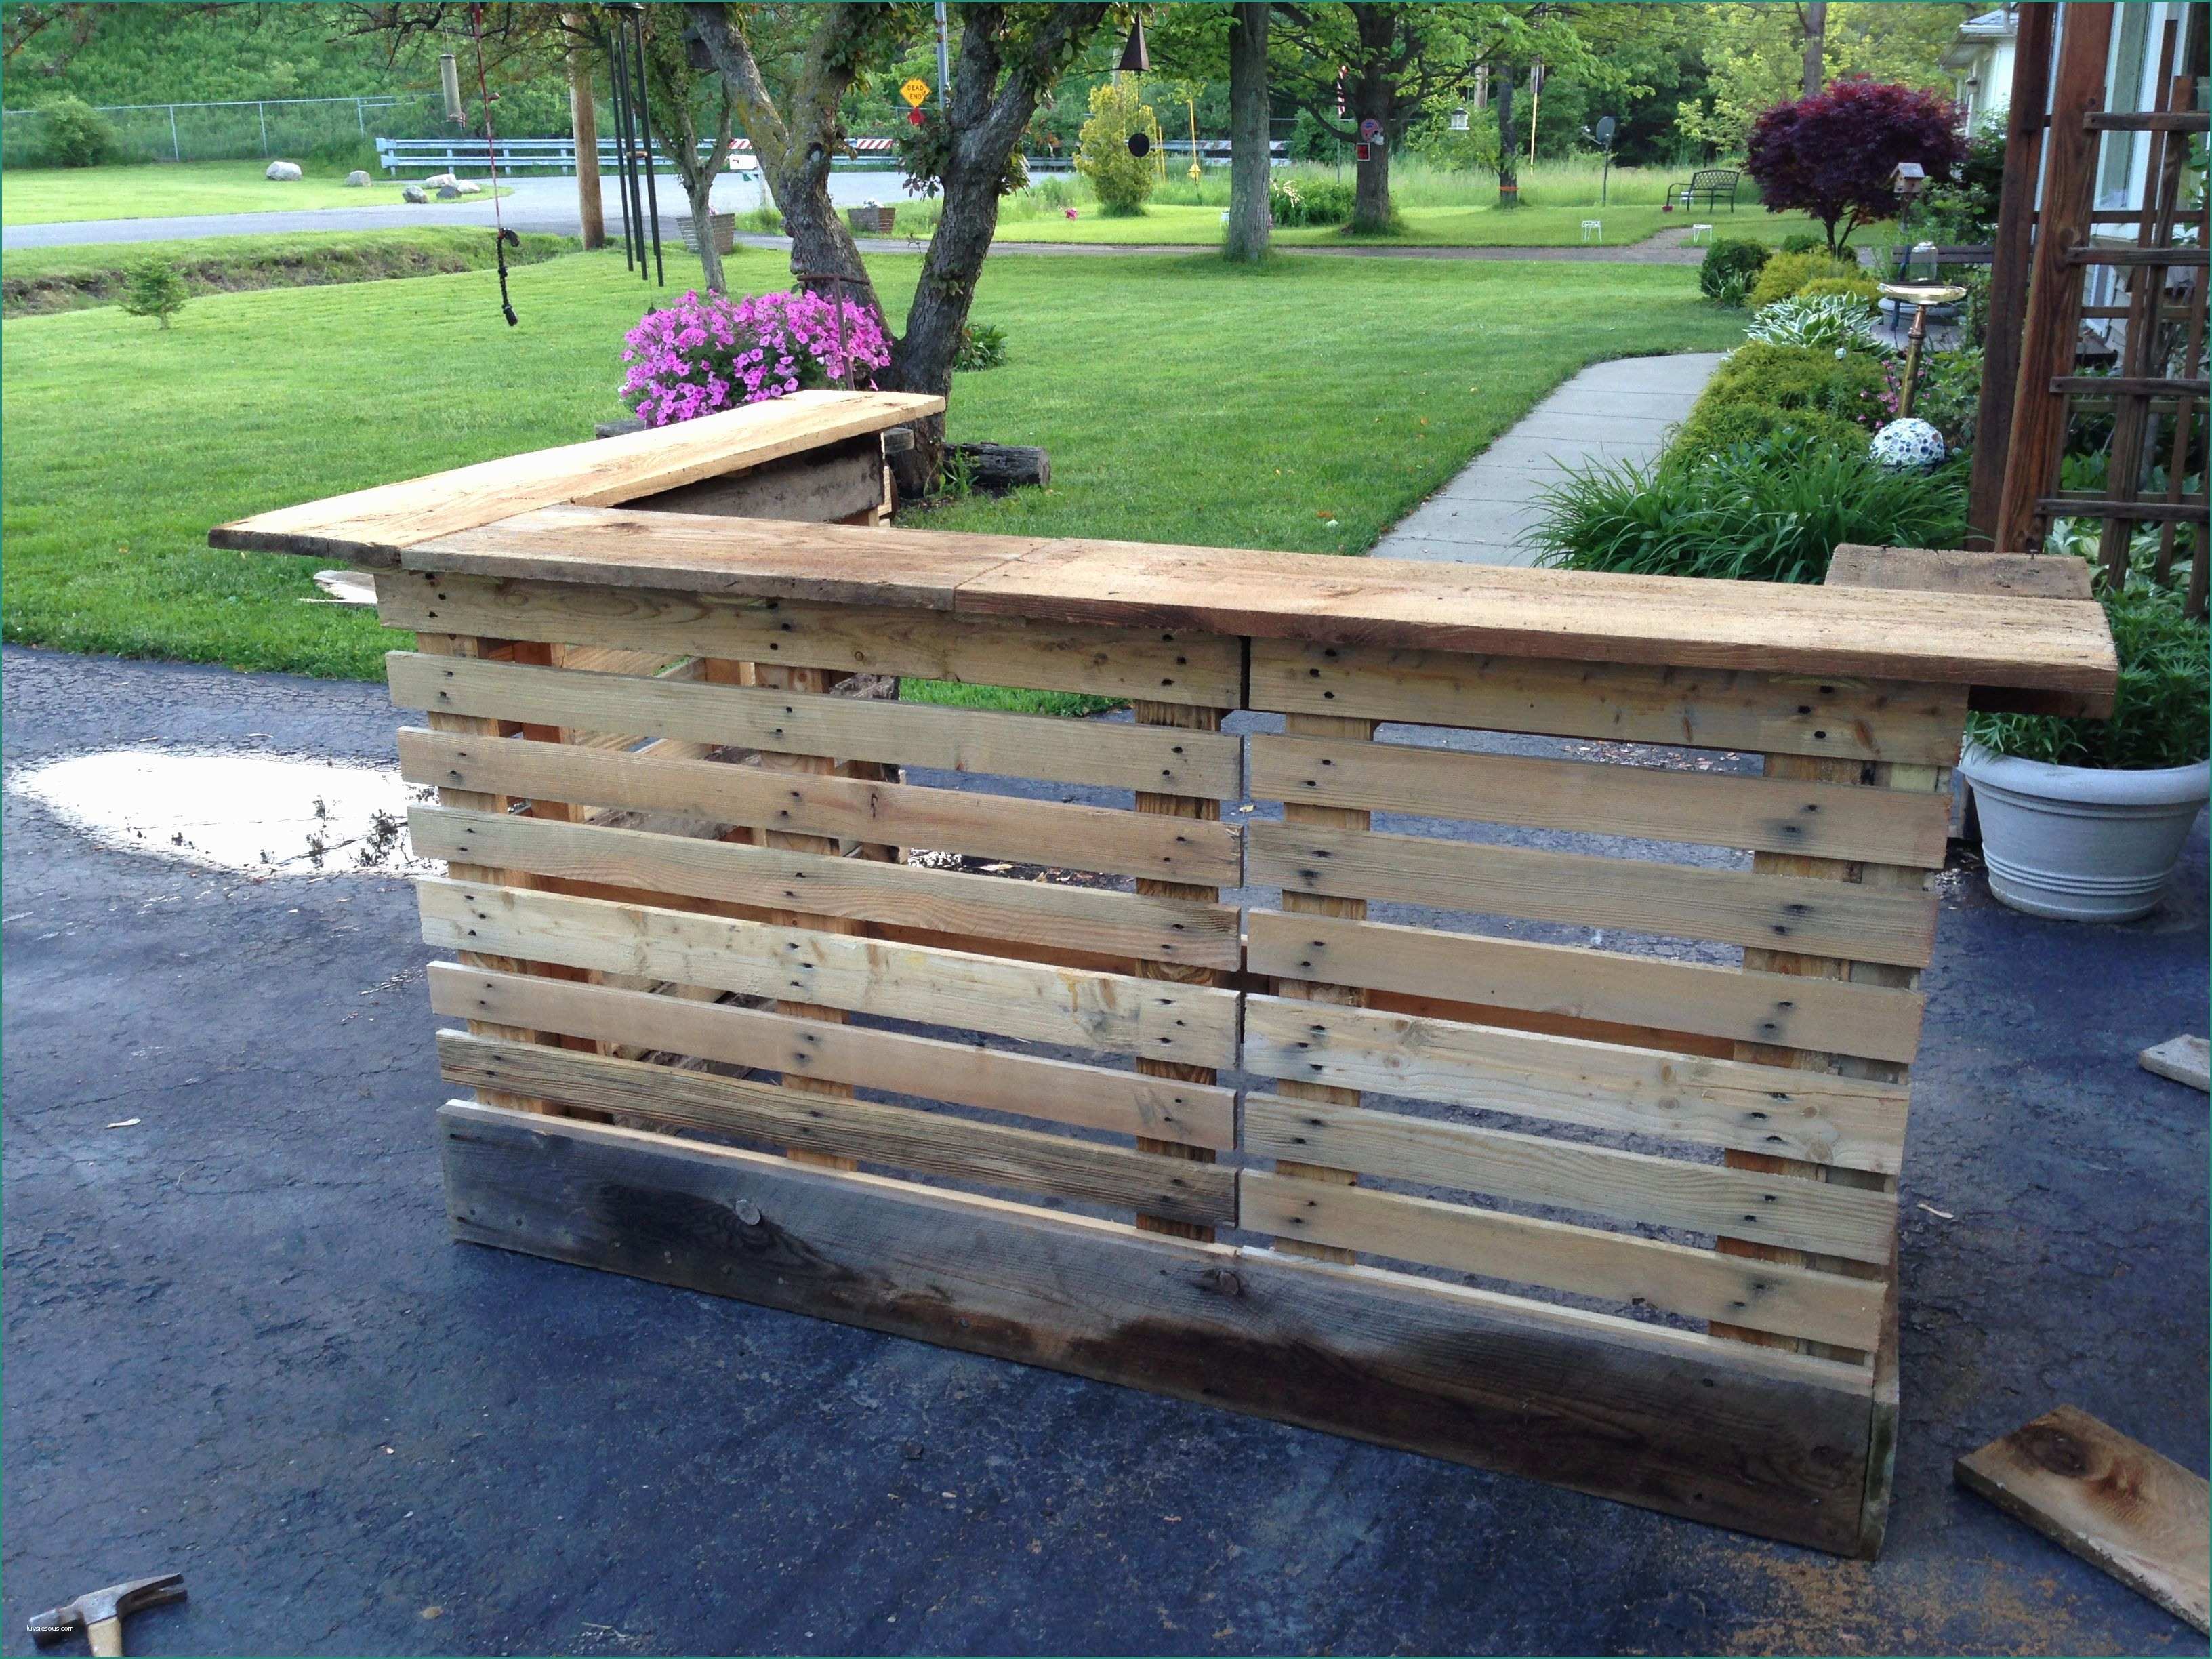 Arredamento Bar Con Bancali E Bar Made From Upcycled Pallets and 200 Year Old Barn Wood Please